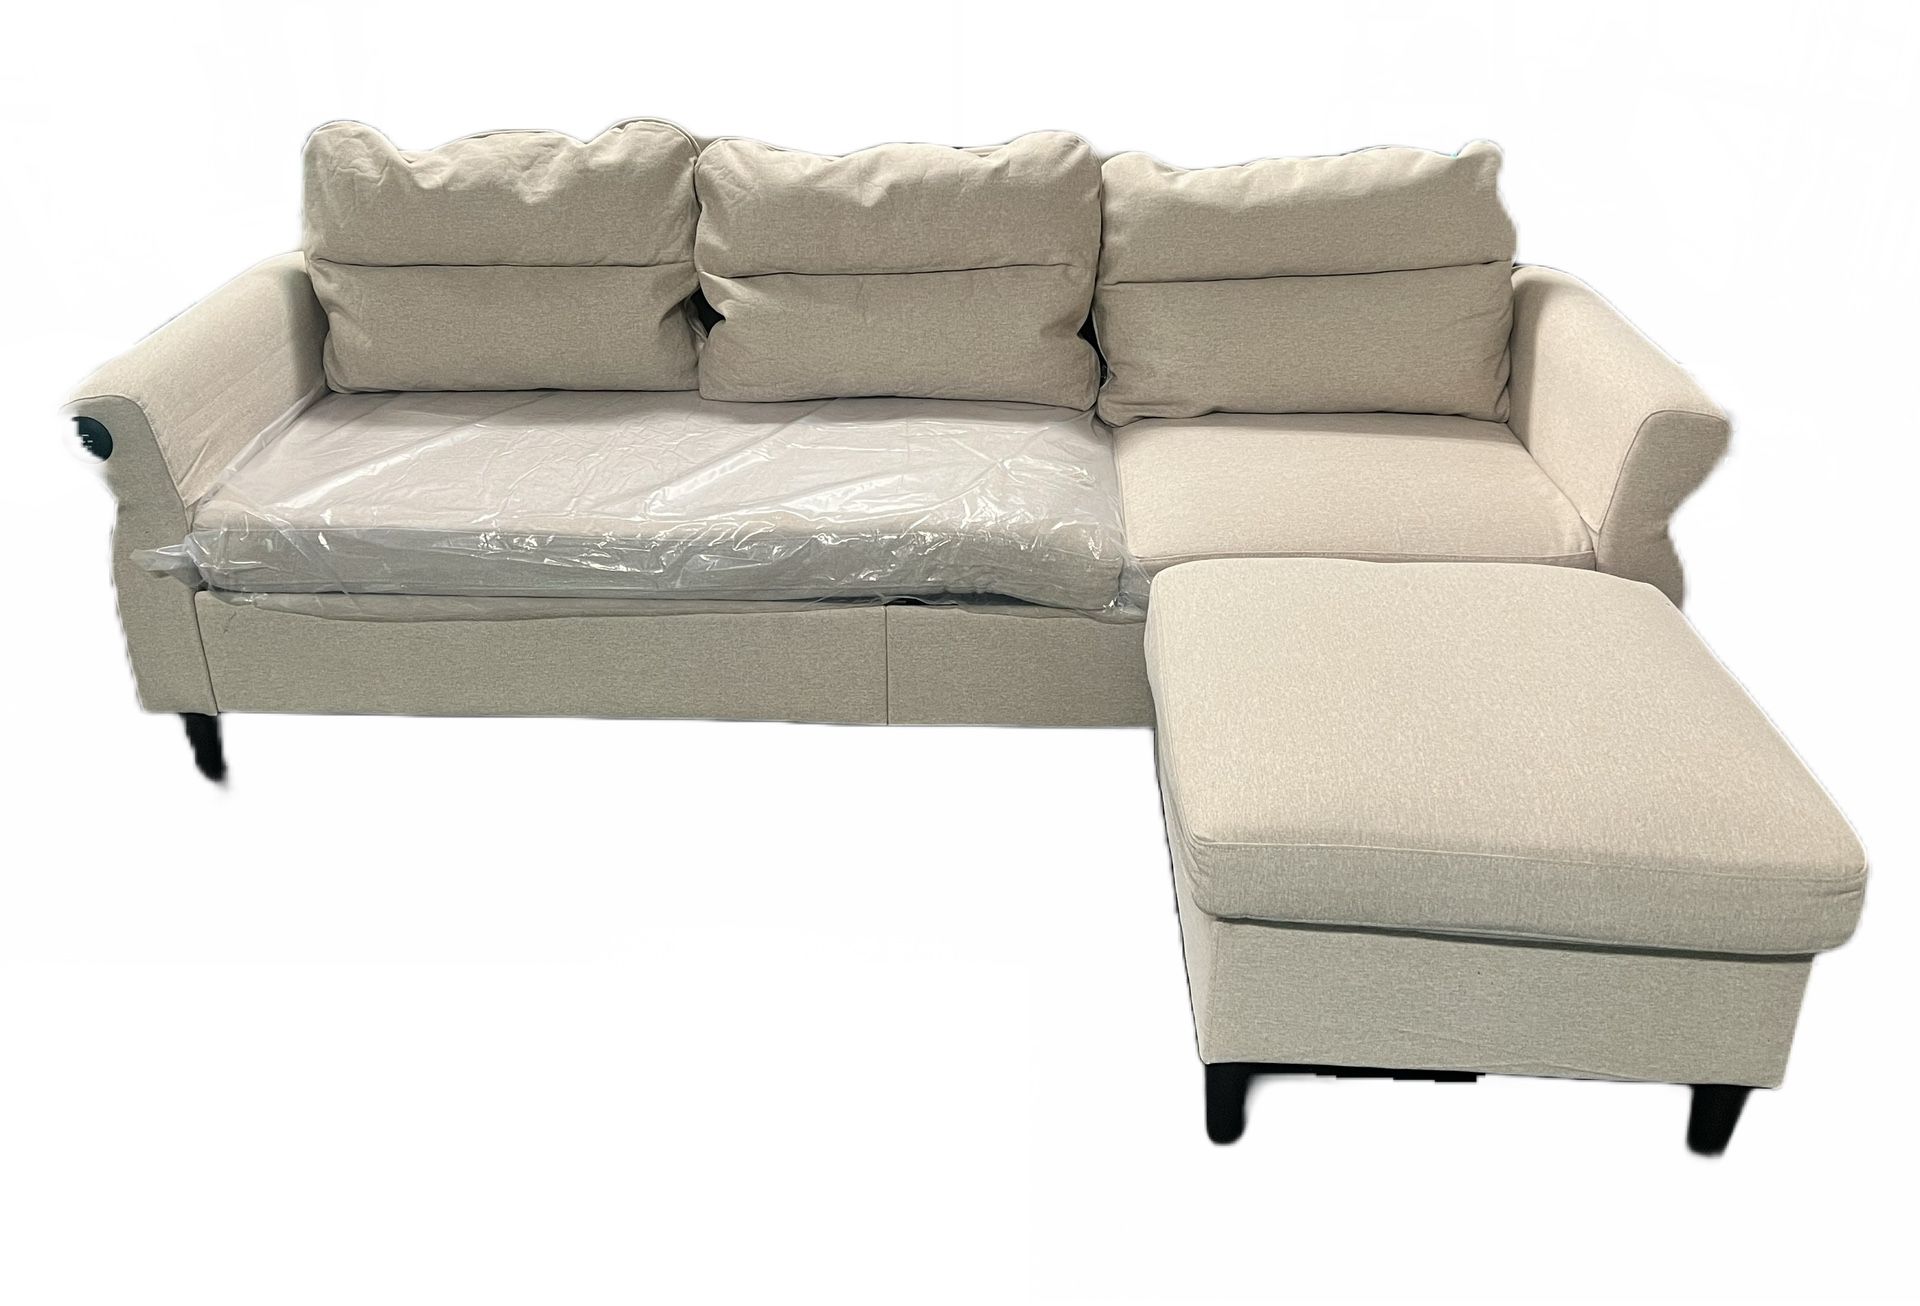 Sofa sectional with usb. Oatmeal beige. Brand new 98x73x46